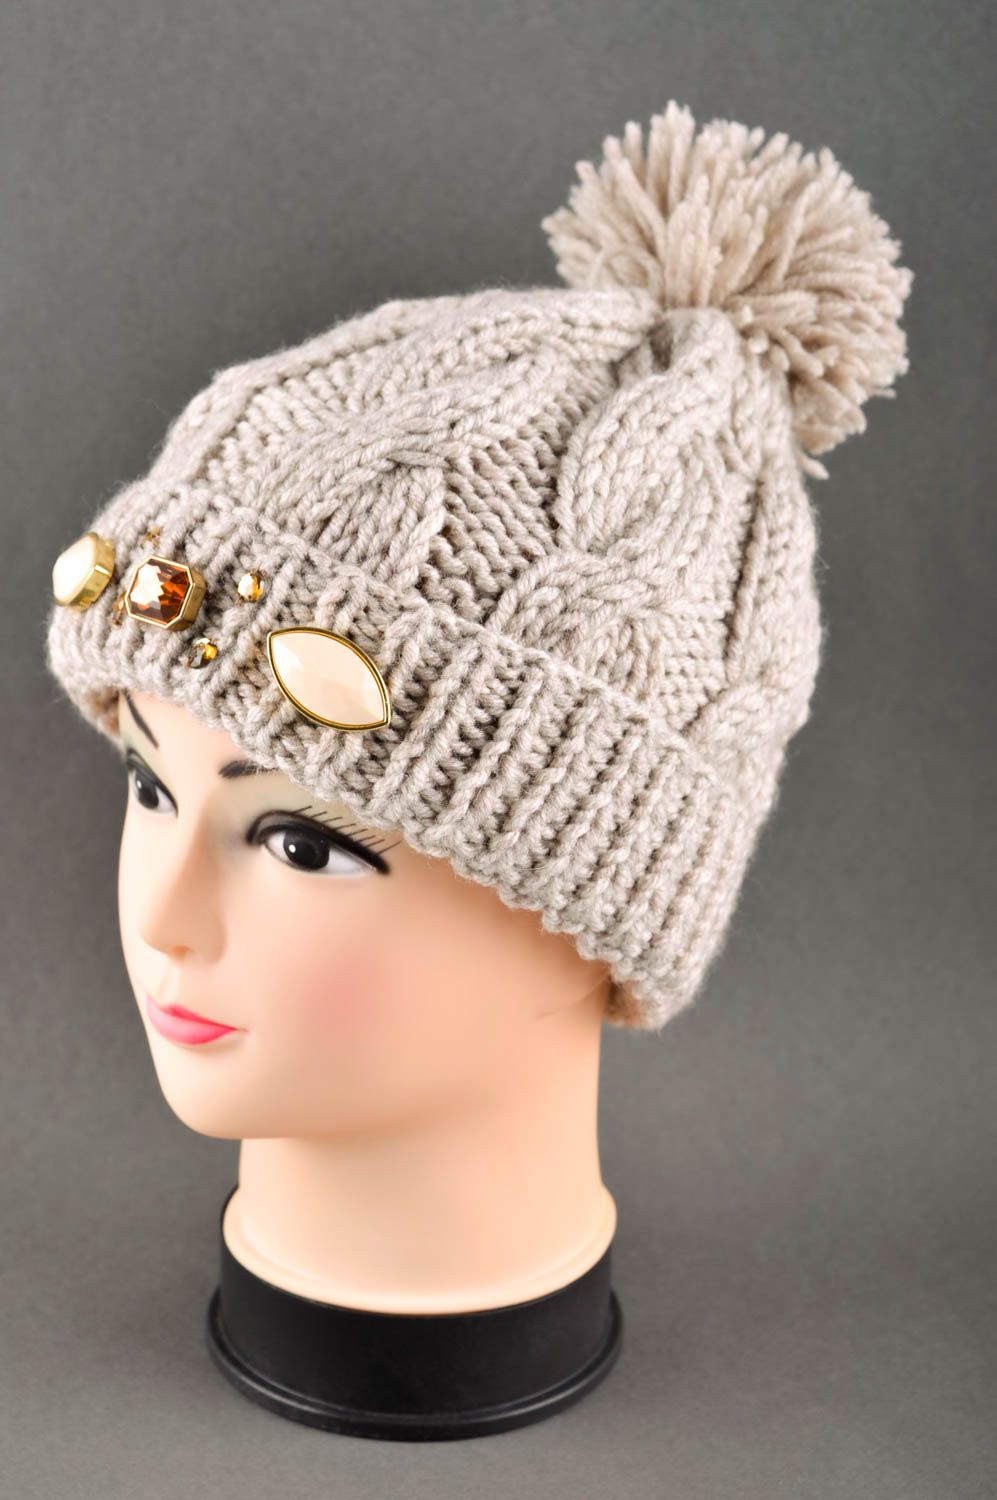 Handmade cute winter cap knitted warm accessories stylish hat for women photo 1